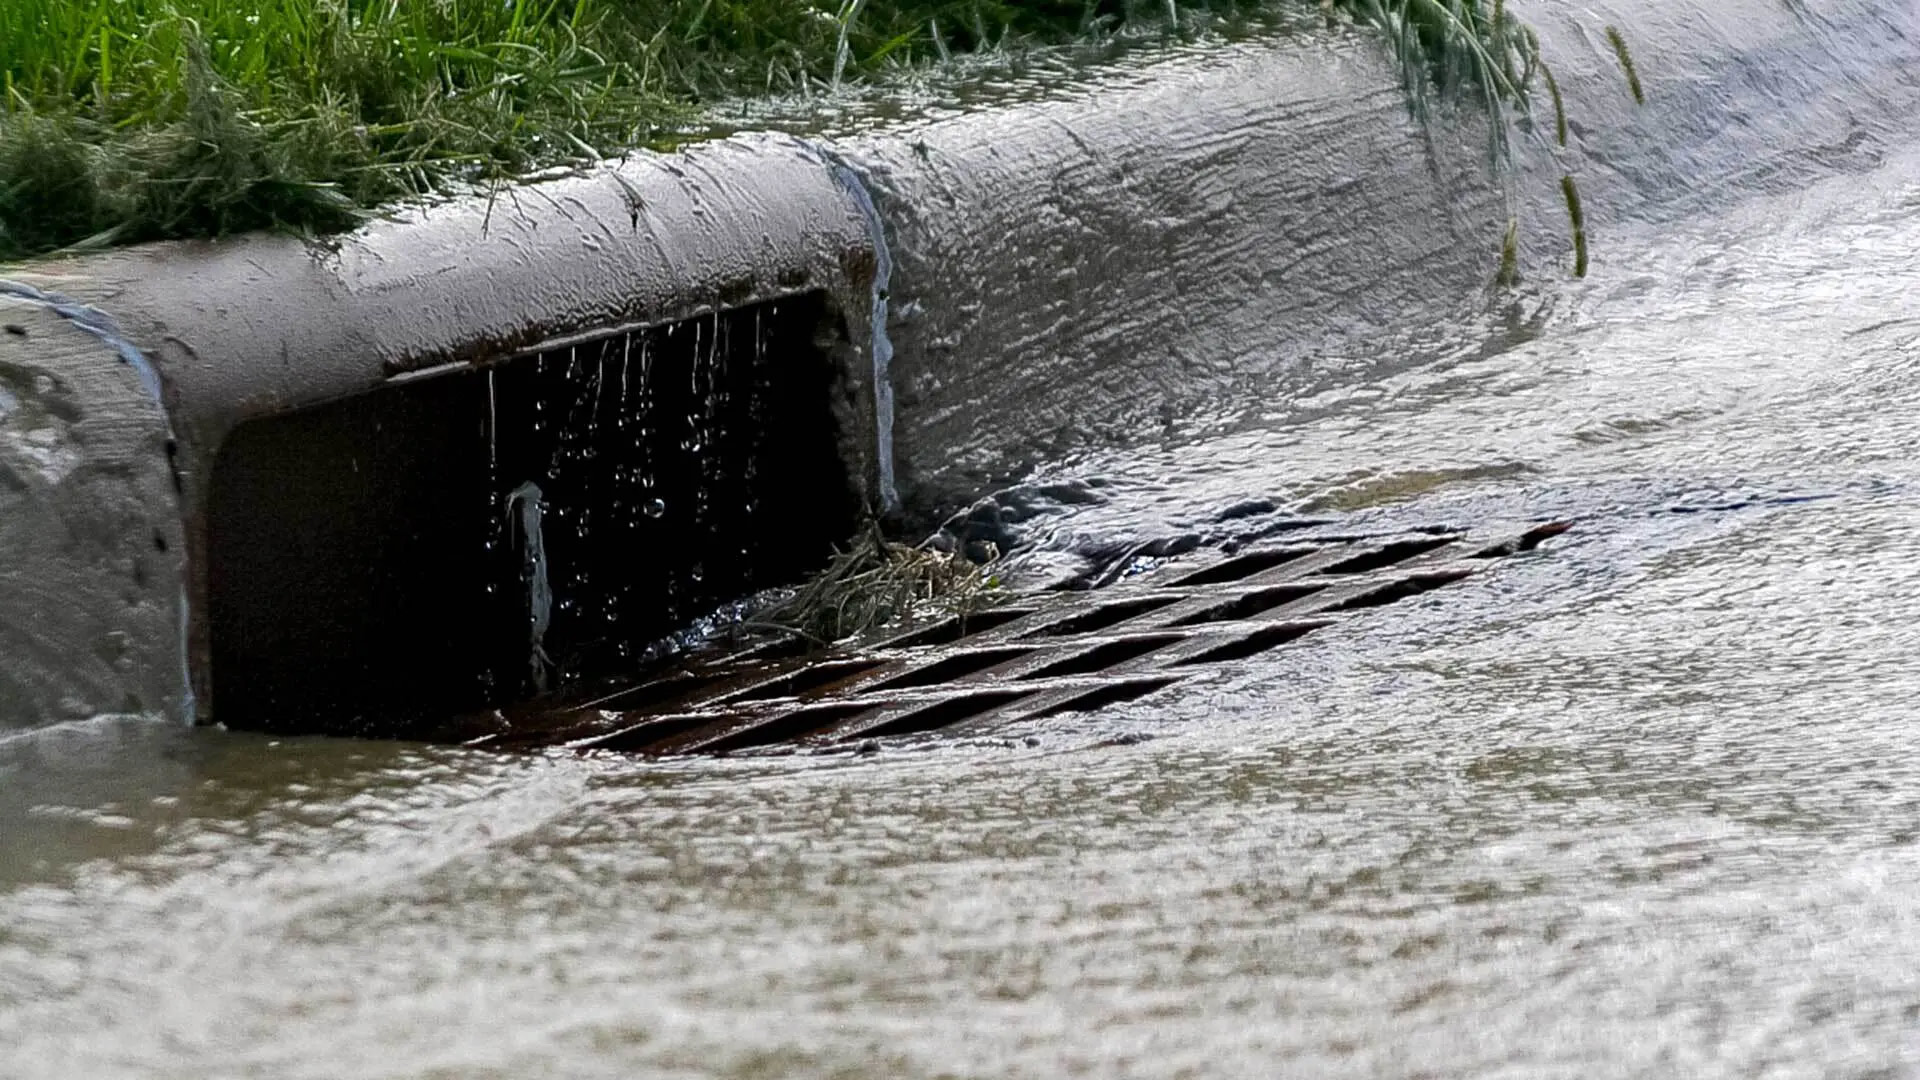 A new University of Maryland study was the first of its kind to analyze traditional sewers along with modern "green" stormwater infrastructure in D.C. through a socioeconomic lens, with the aim of helping city planners fund improvements in neighborhoods most at risk.